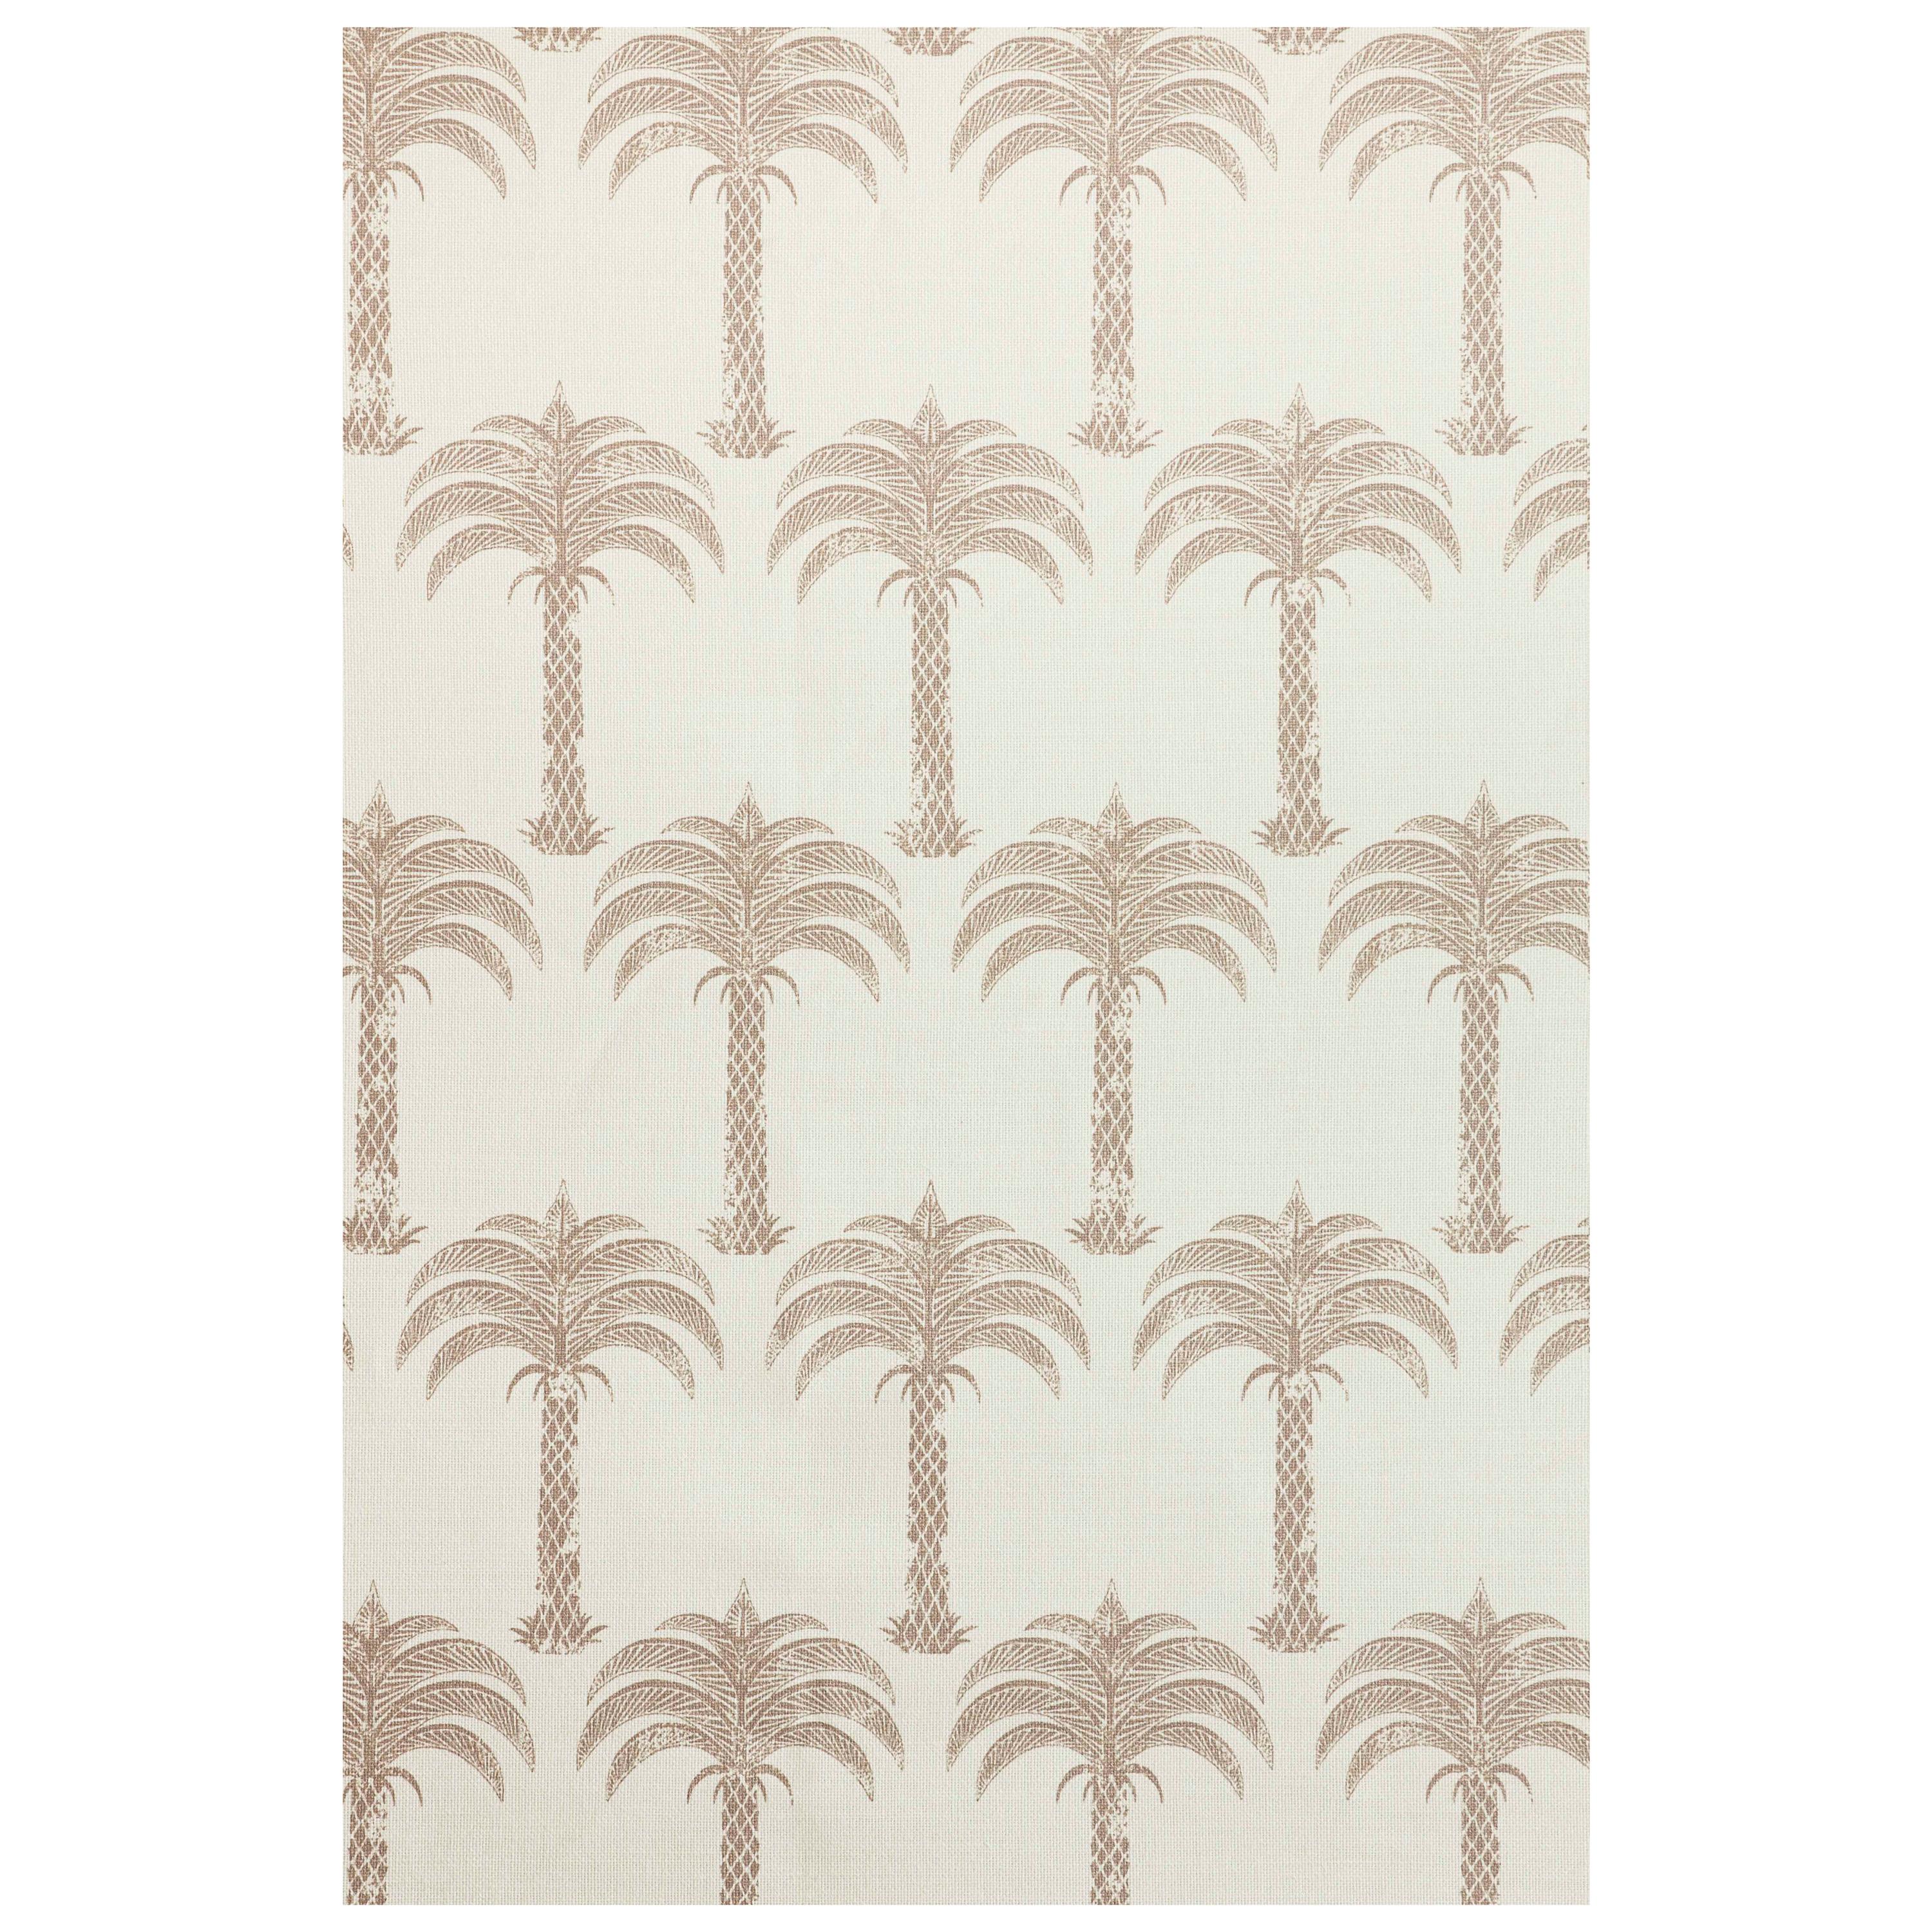 'Marrakech Palm' Contemporary, Traditional Fabric in Soft Gold For Sale